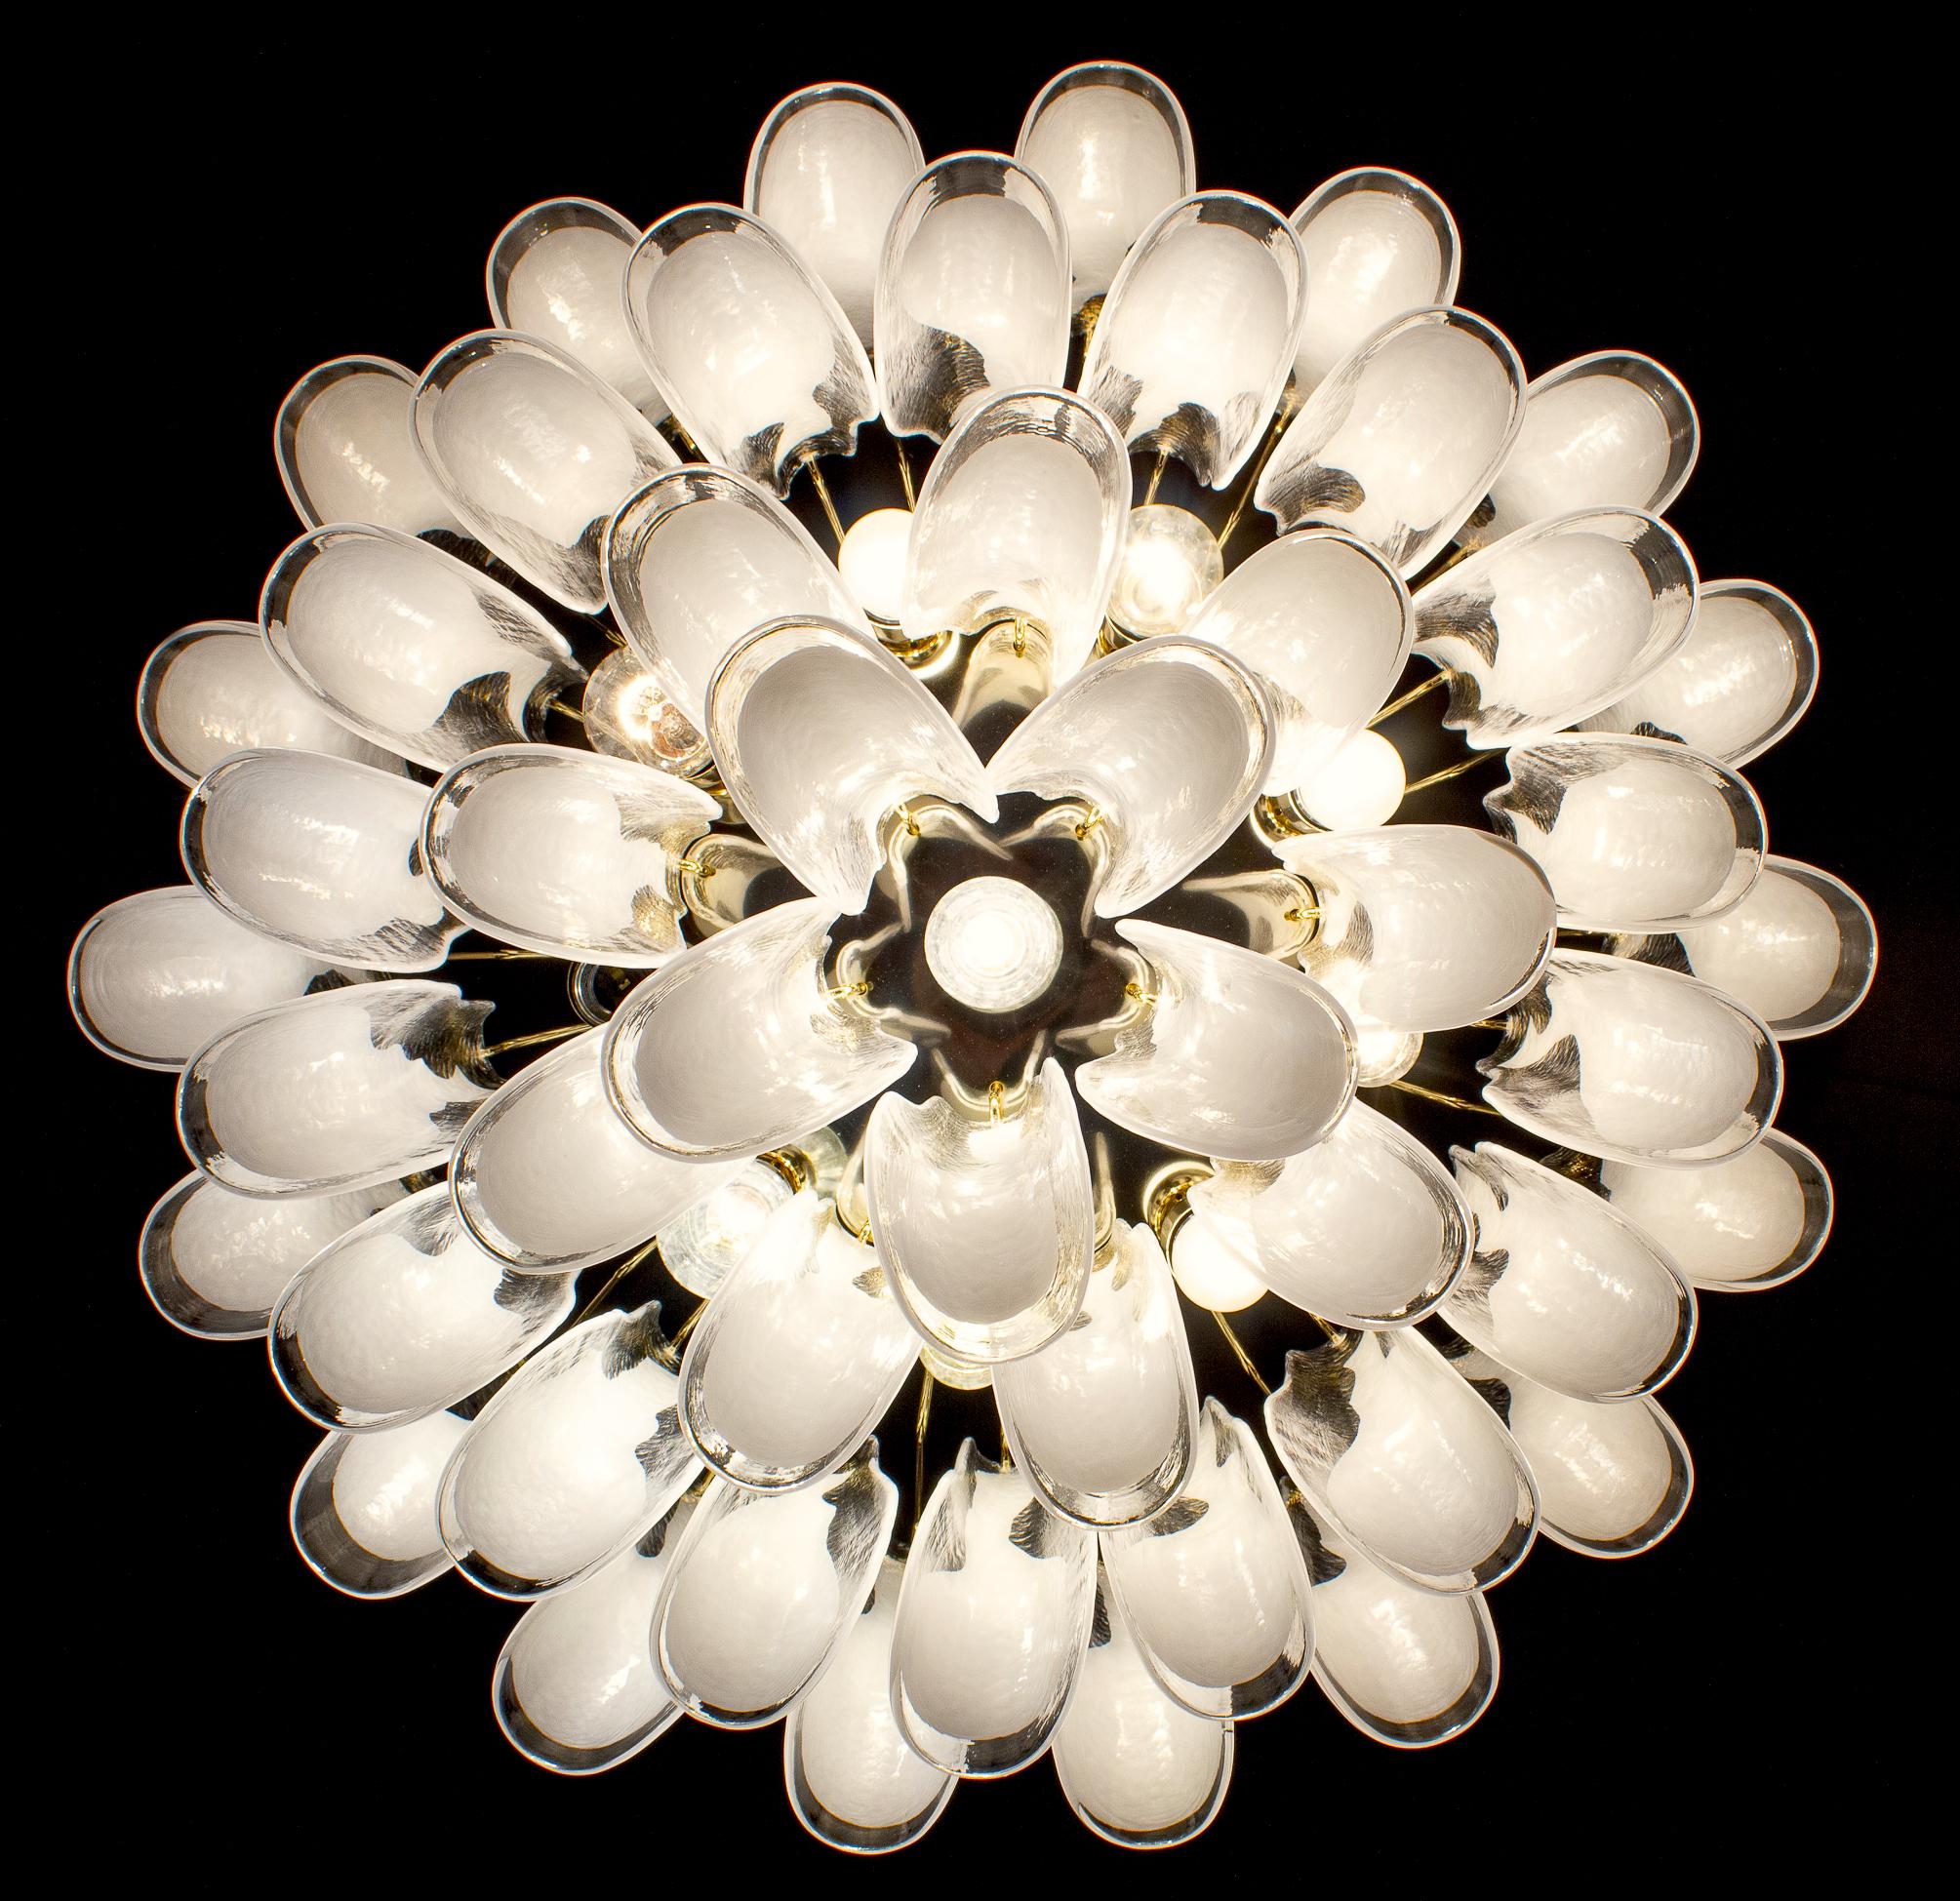 Striking Pair of Large Murano Glass Chandelier or Ceiling Light For Sale 5